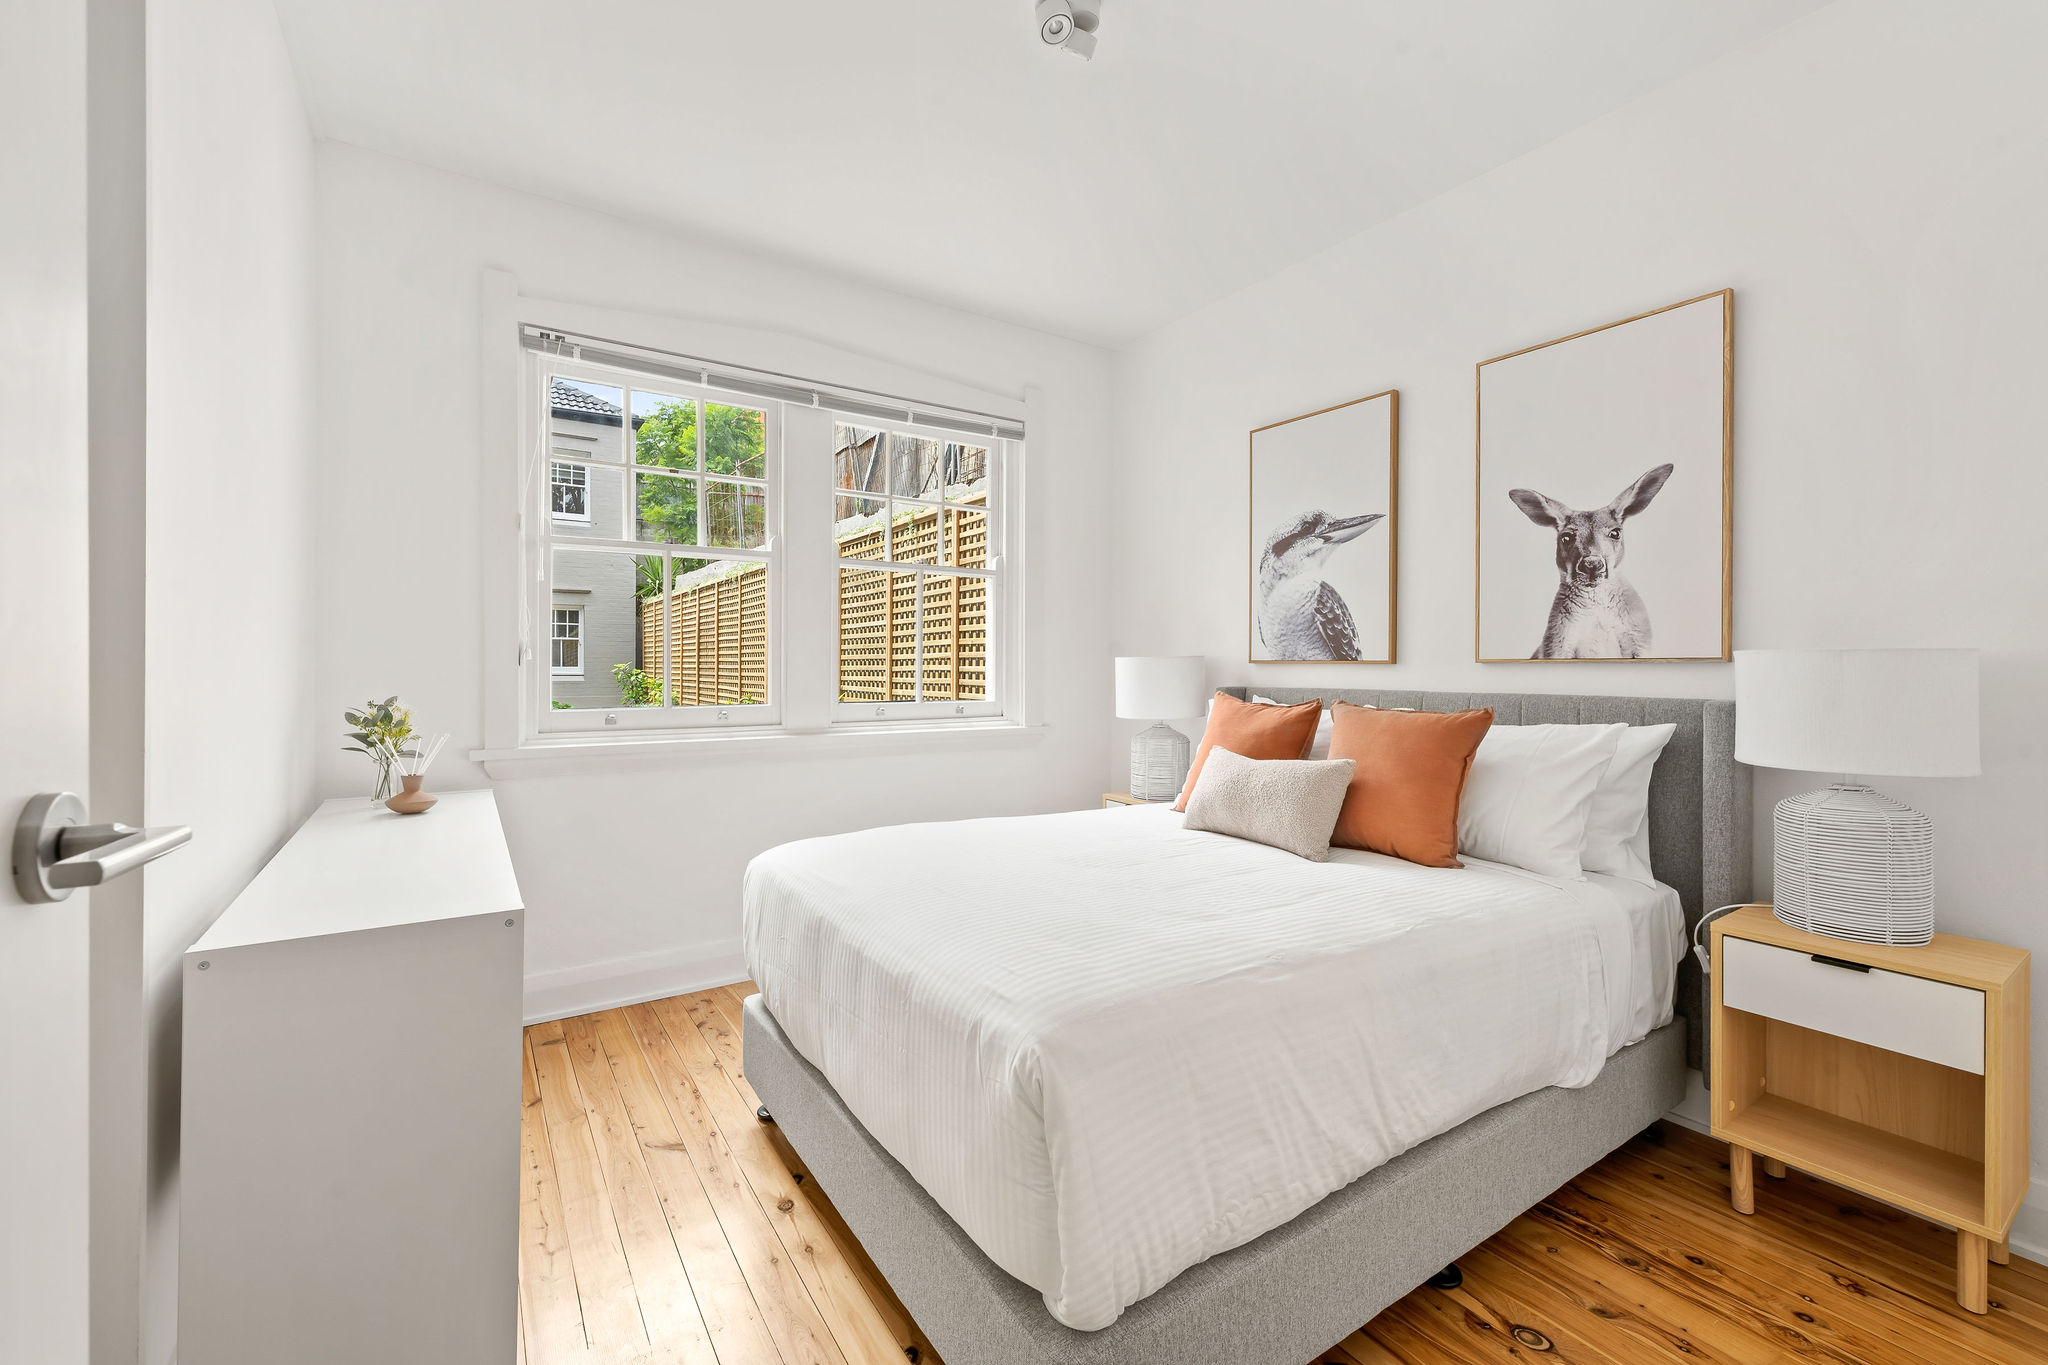 Bedroom - Two Bedroom Apartment - Urban Rest - Mulwarree Ave Apartments - Sydney